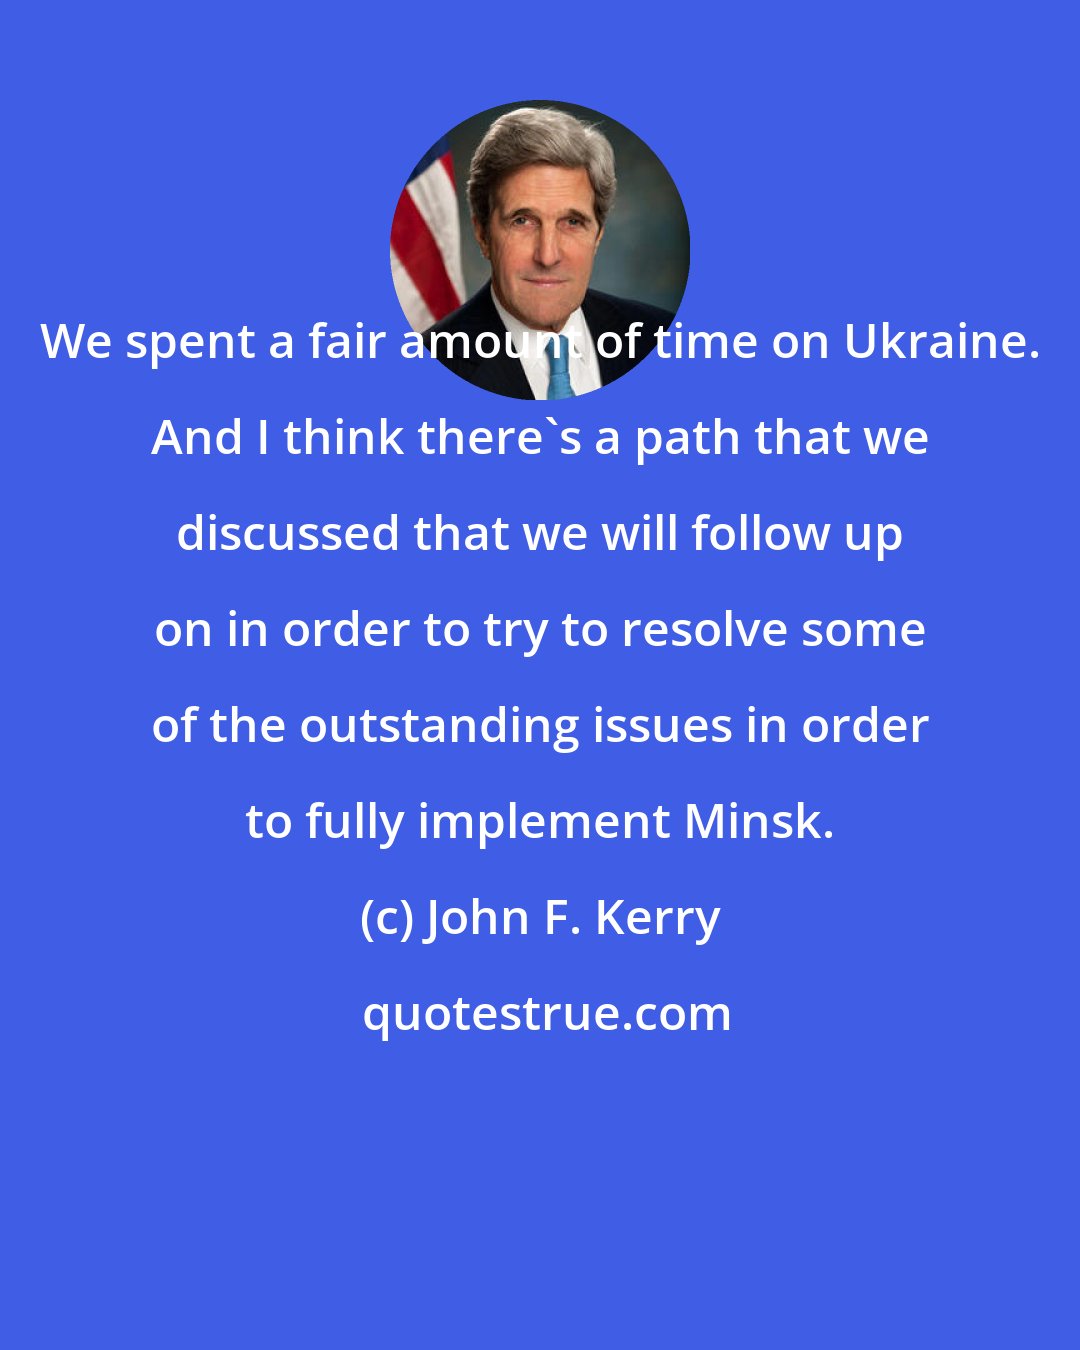 John F. Kerry: We spent a fair amount of time on Ukraine. And I think there's a path that we discussed that we will follow up on in order to try to resolve some of the outstanding issues in order to fully implement Minsk.